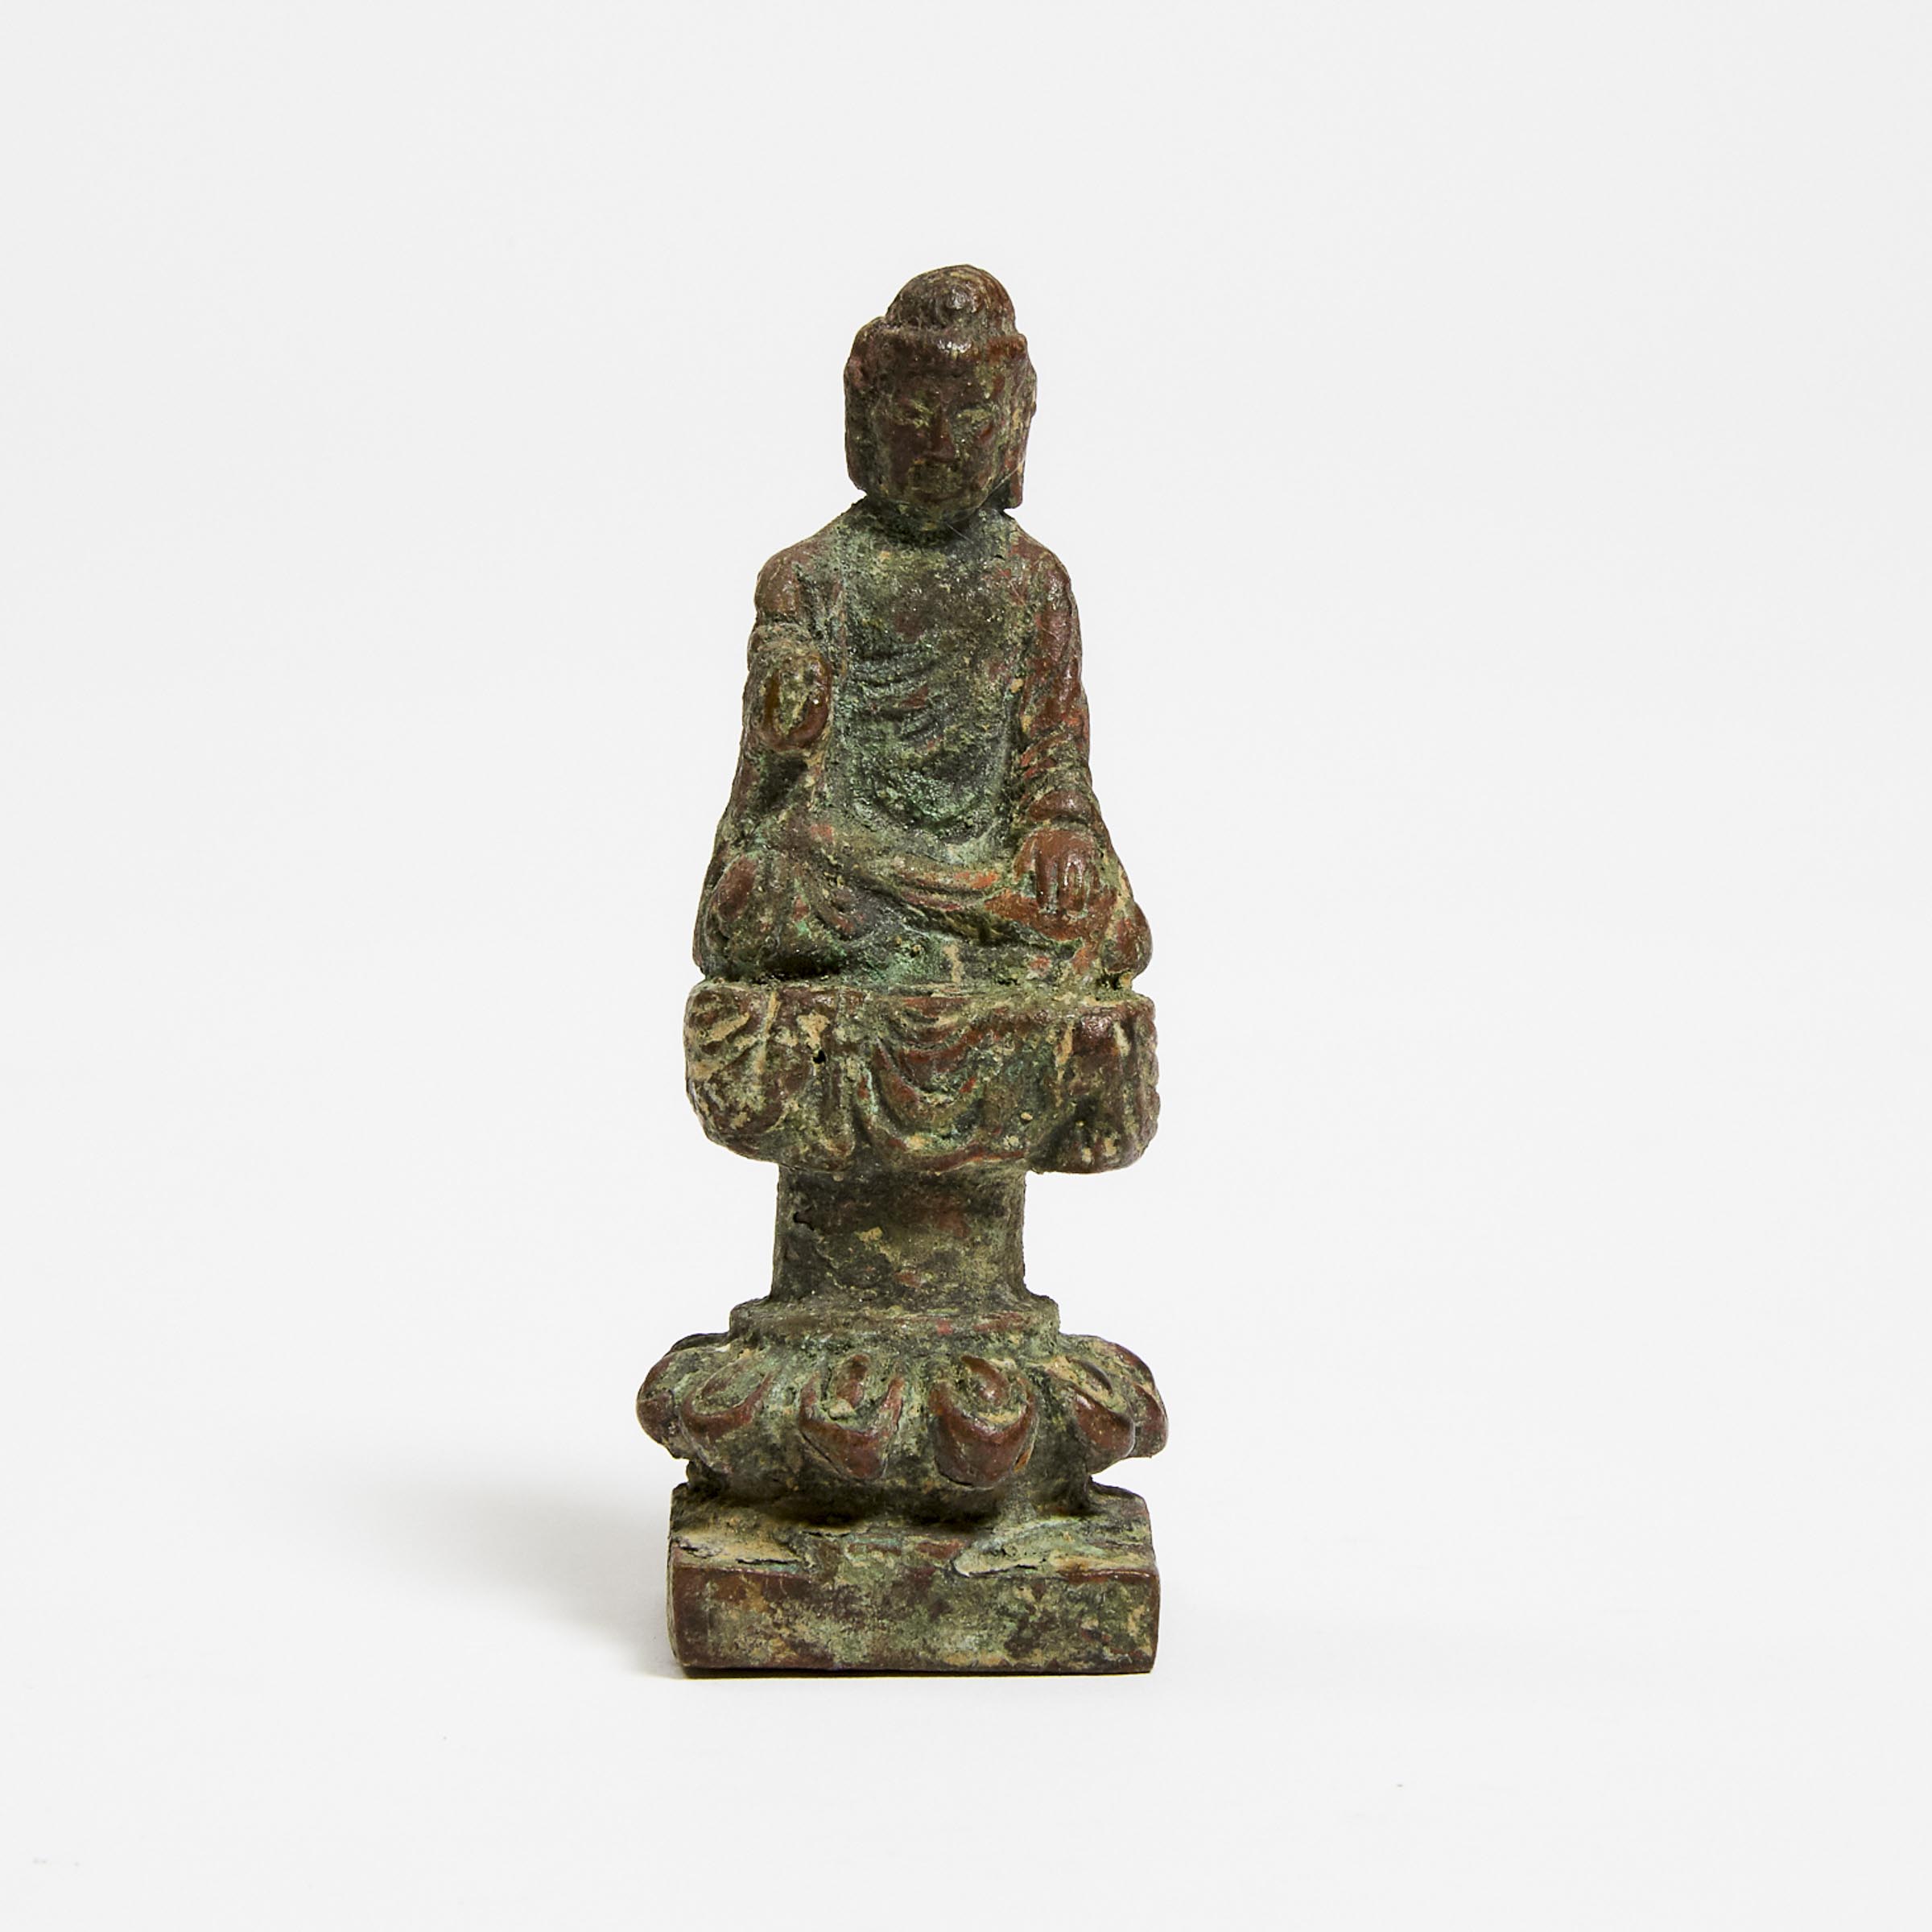 A Small Bronze Figure of a Seated Buddha, Tang Dynasty or Later